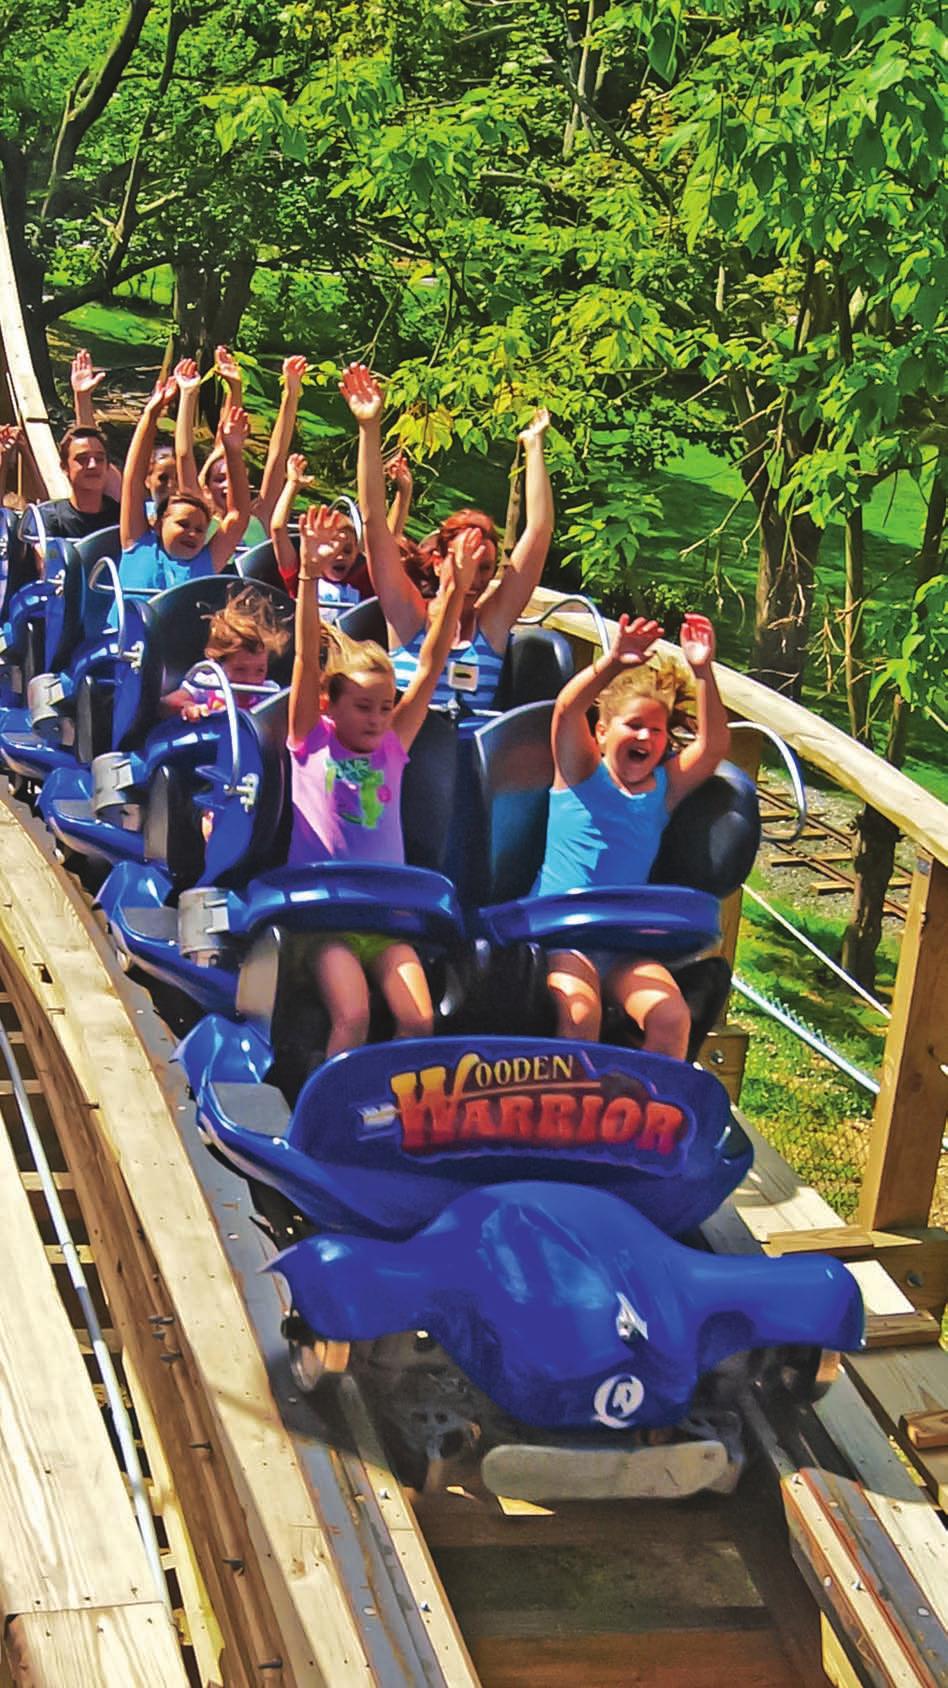 As a result, the designs that the team produces are consistently the highest rated wooden rides within the industry such as The Voyage wooden roller coaster at Holiday World, rated the #1 wooden